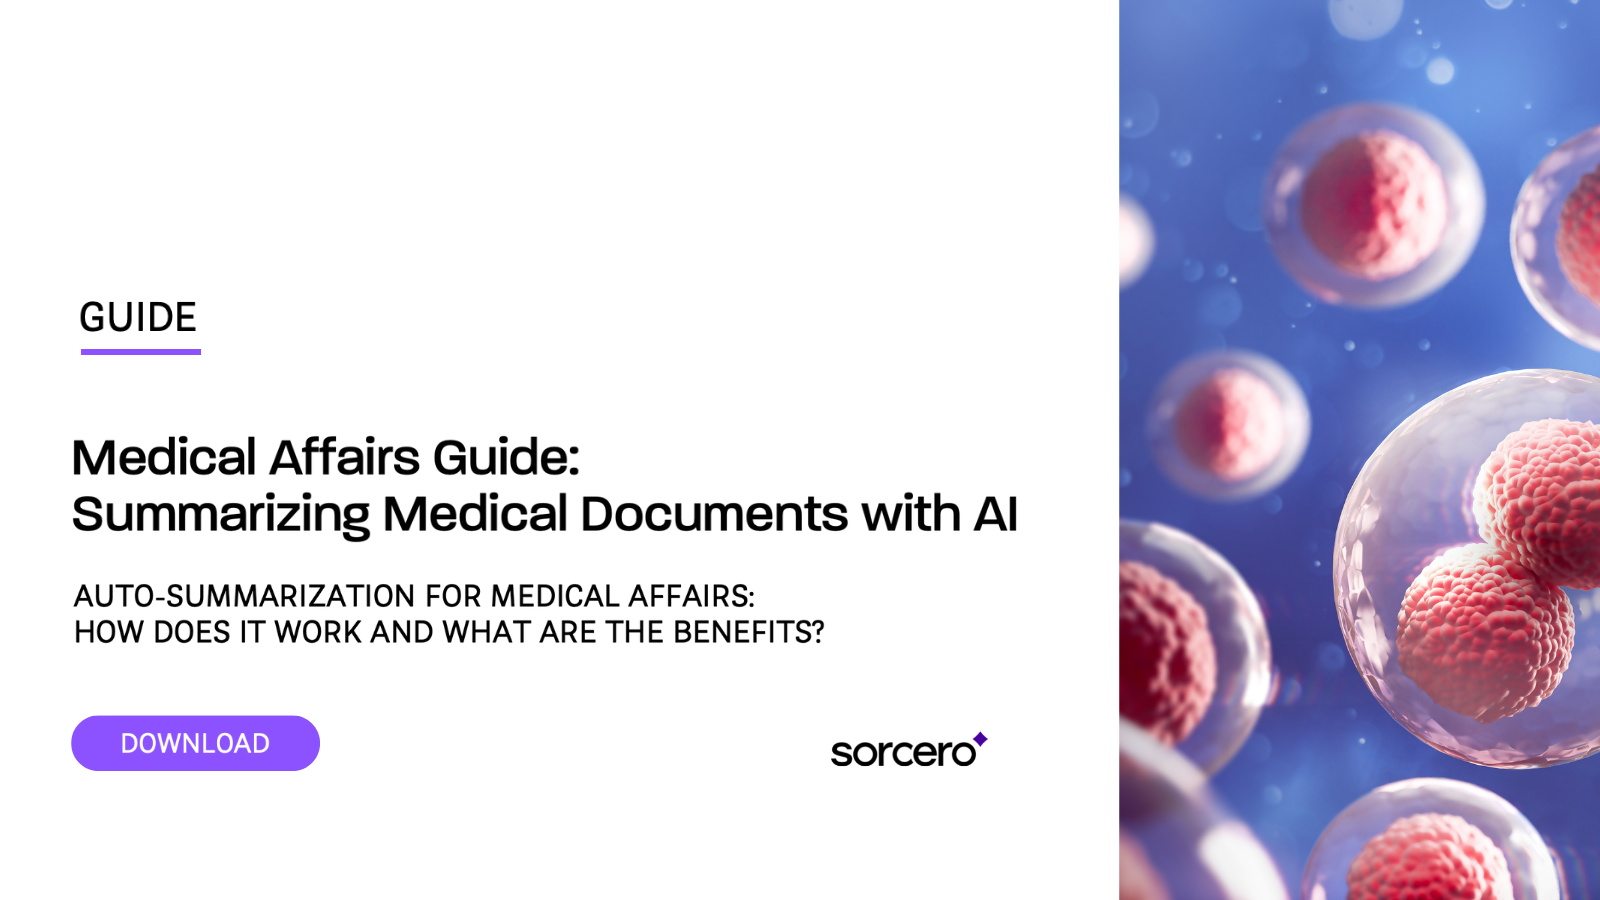 A Guide to Summarizing Medical Documents with AI